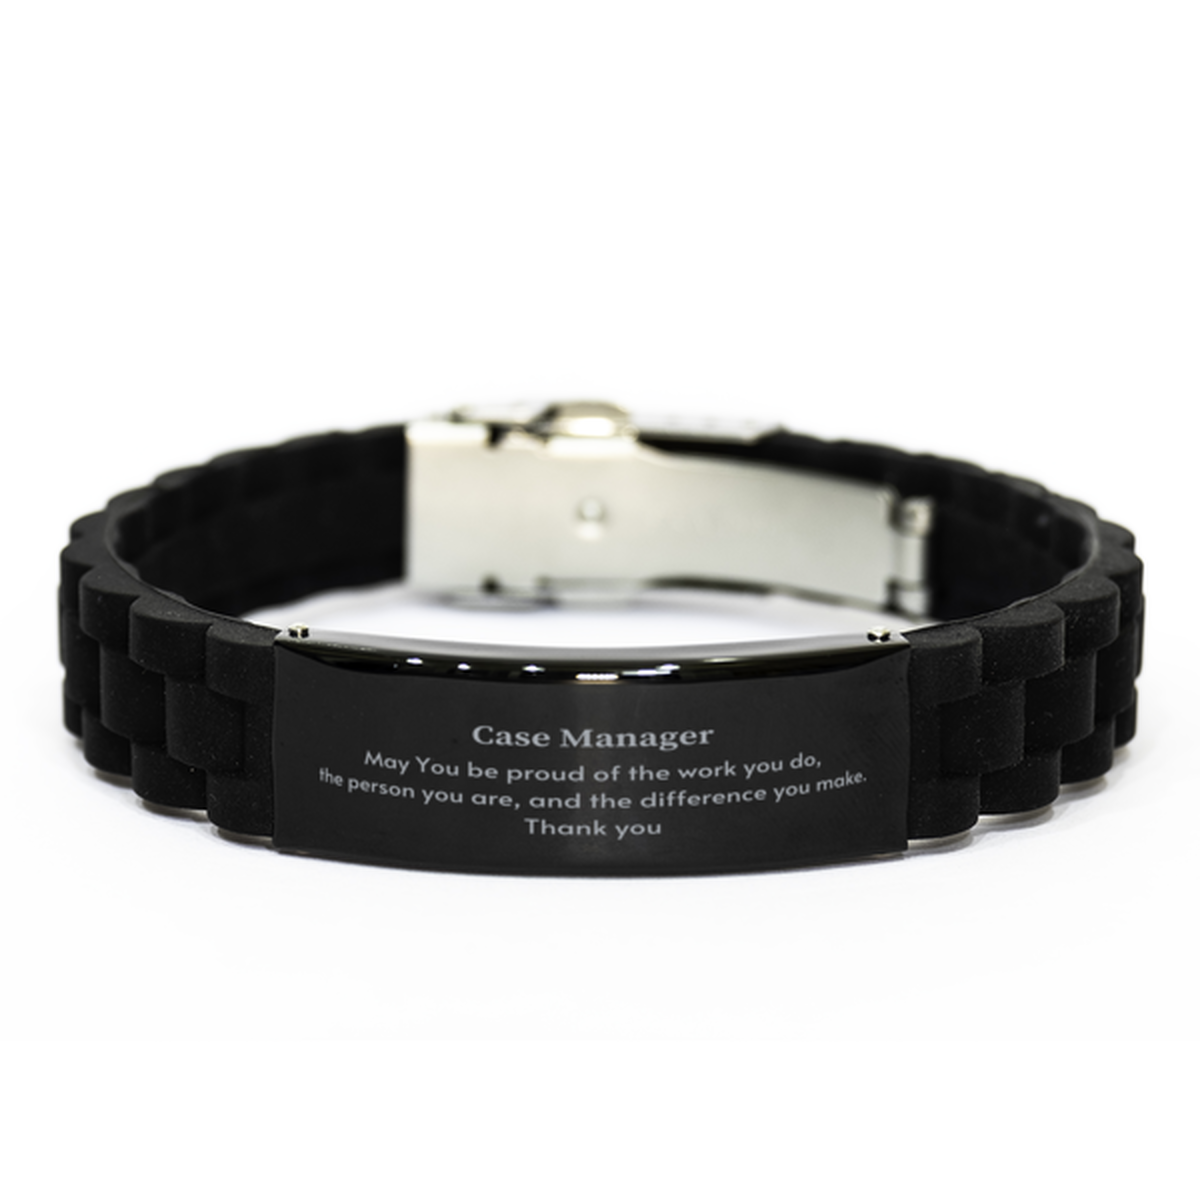 Heartwarming Black Glidelock Clasp Bracelet Retirement Coworkers Gifts for Case Manager, Case Manager May You be proud of the work you do, the person you are Gifts for Boss Men Women Friends